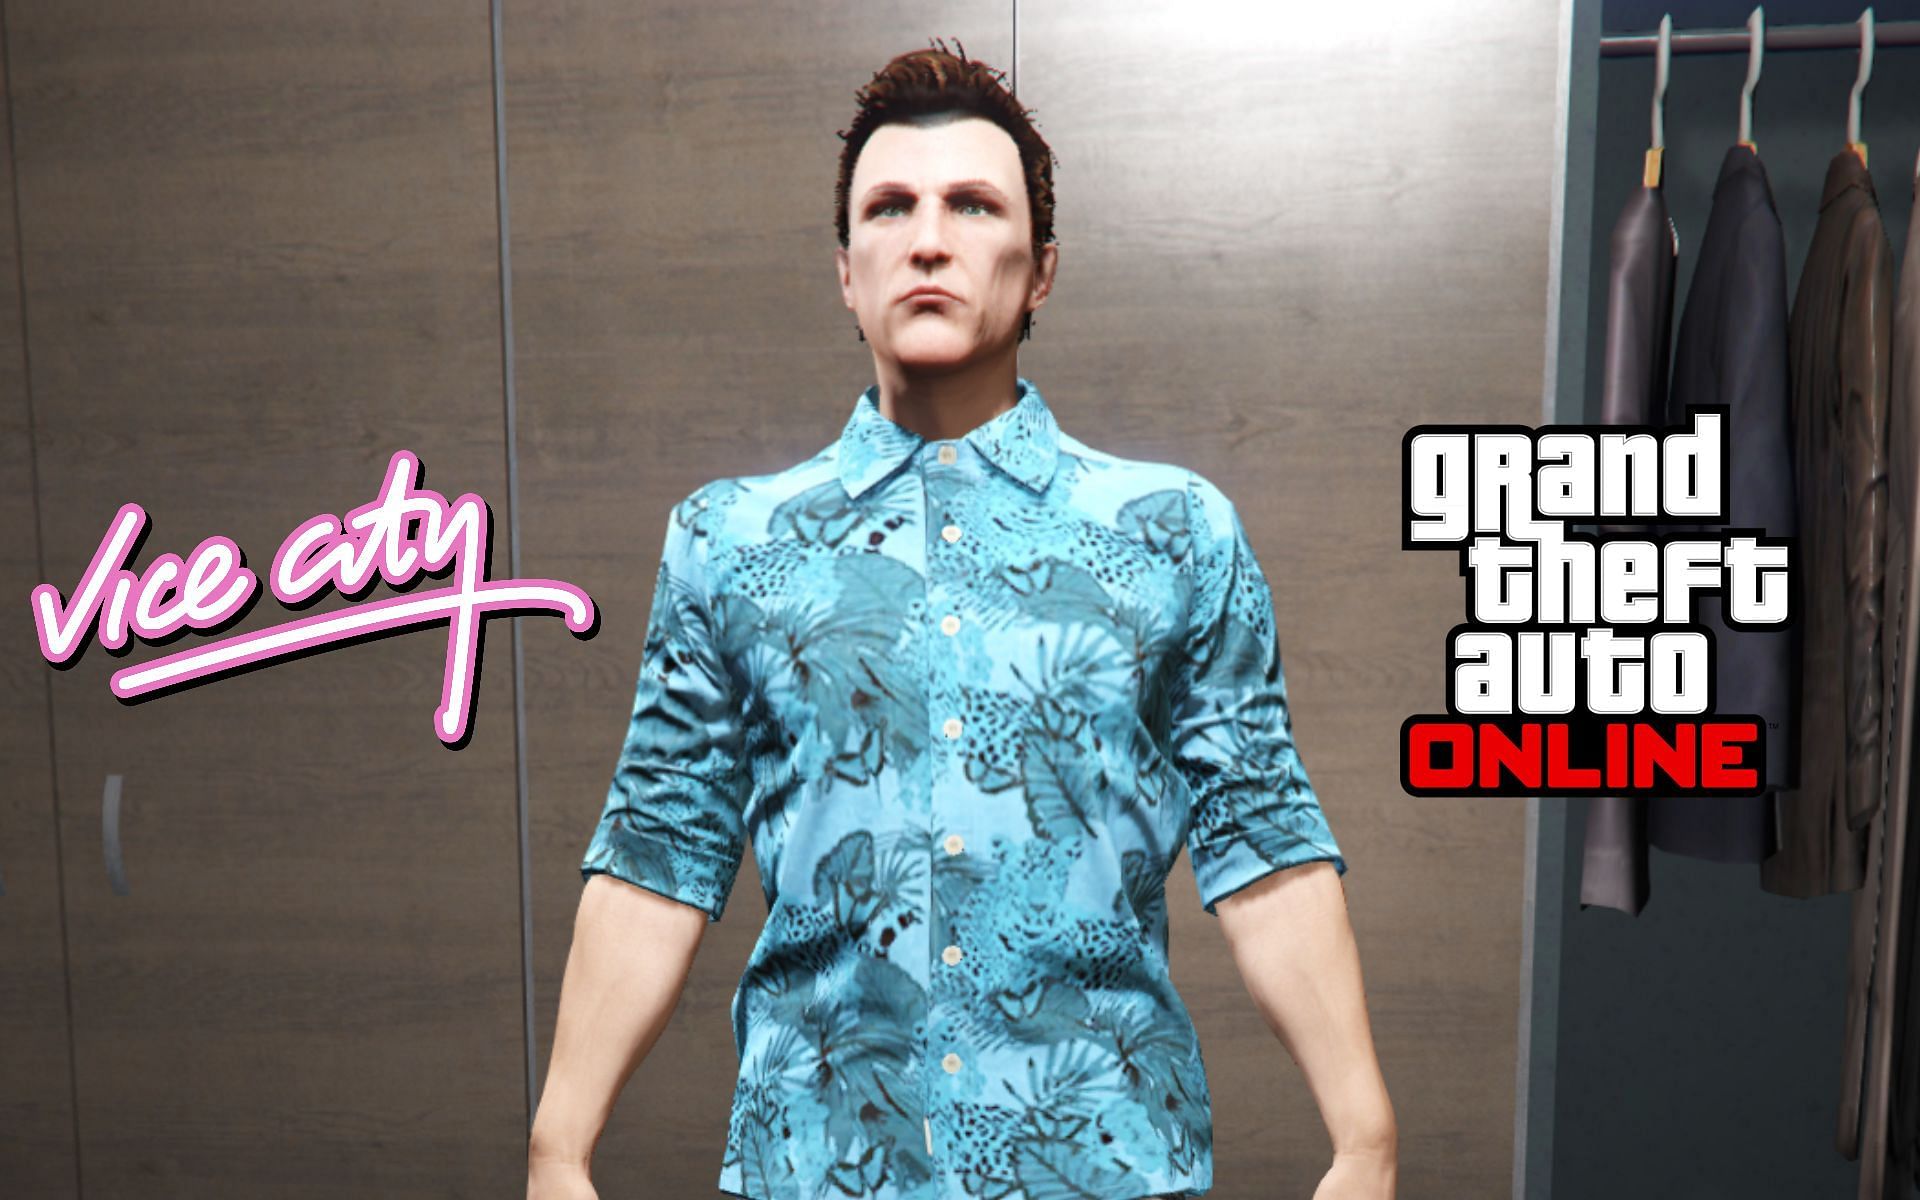 There is no official Tommy Vercetti outfit, but there are a few that look like it (Image via Rockstar Games, M4rtyK4y)